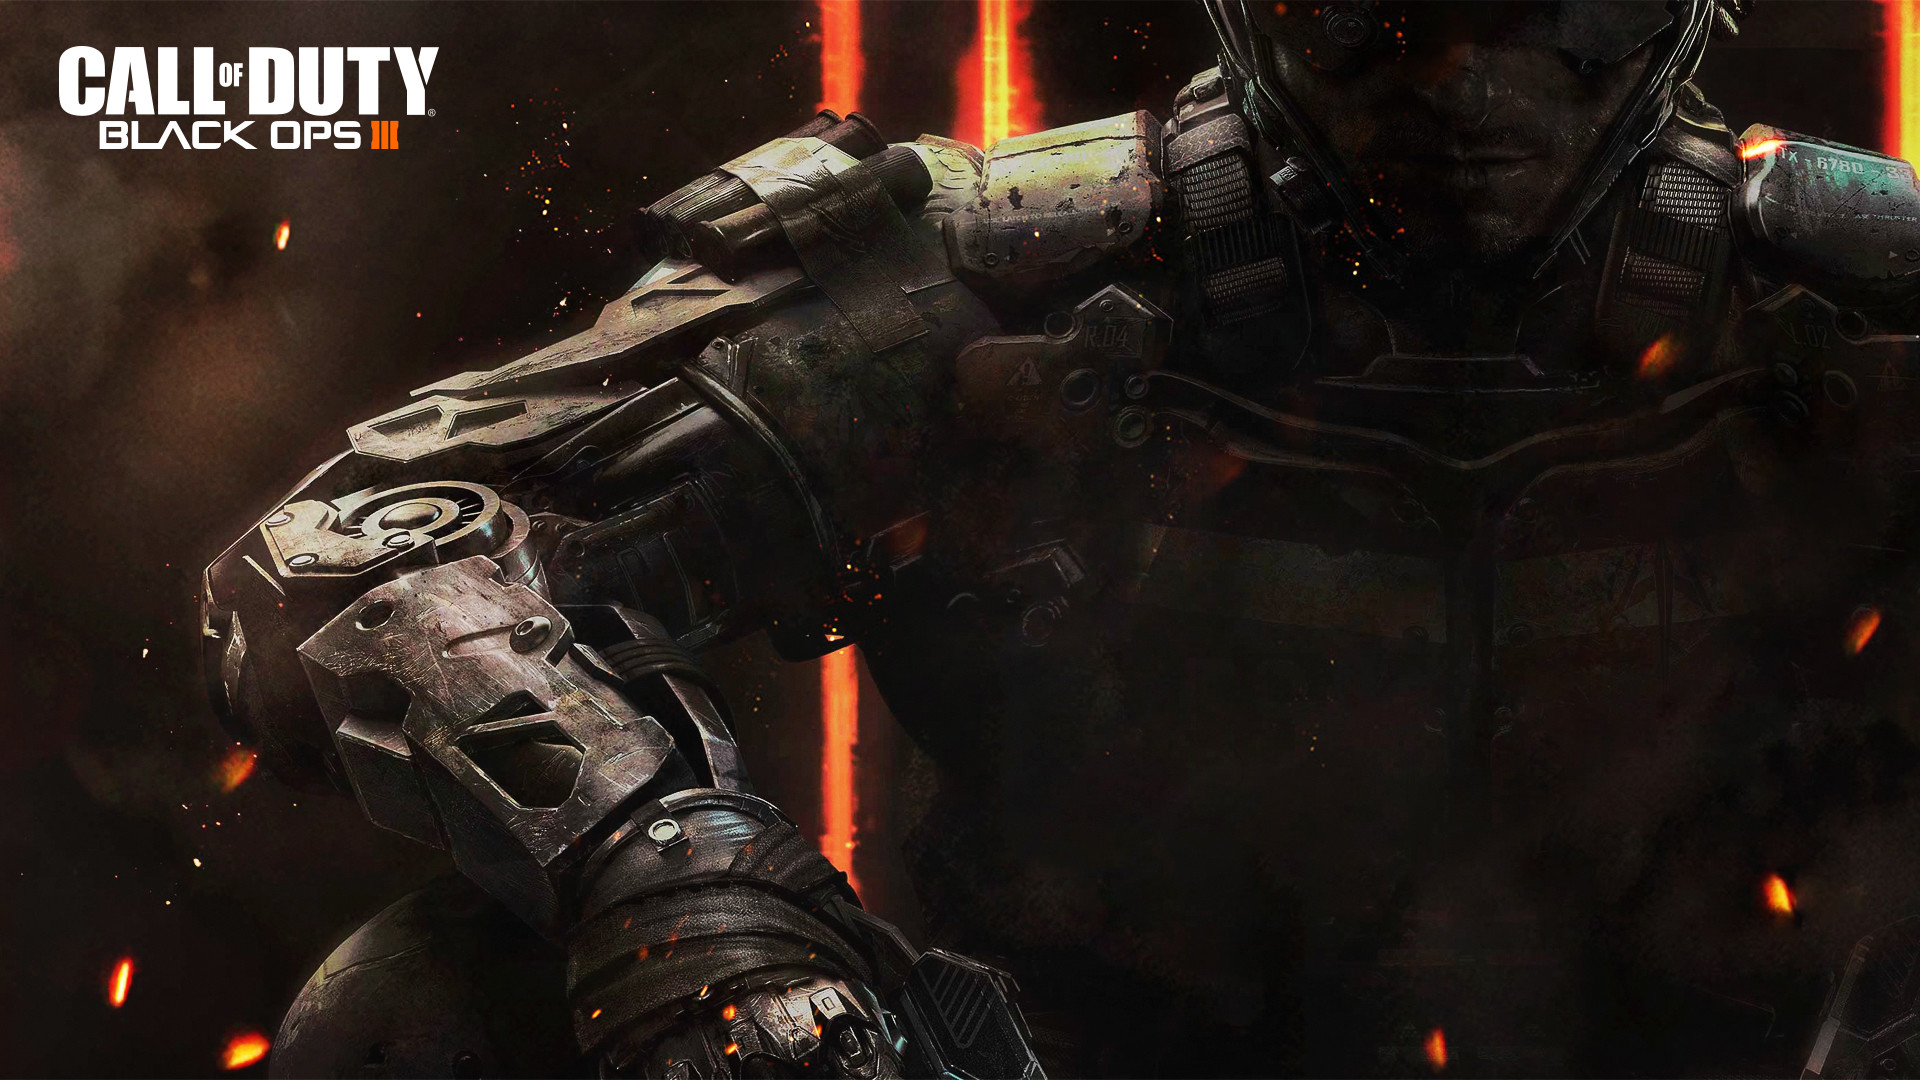 1920x1080 Free HD Black Ops 3 Zombie Wallpapers by unofficialcallofduty.com